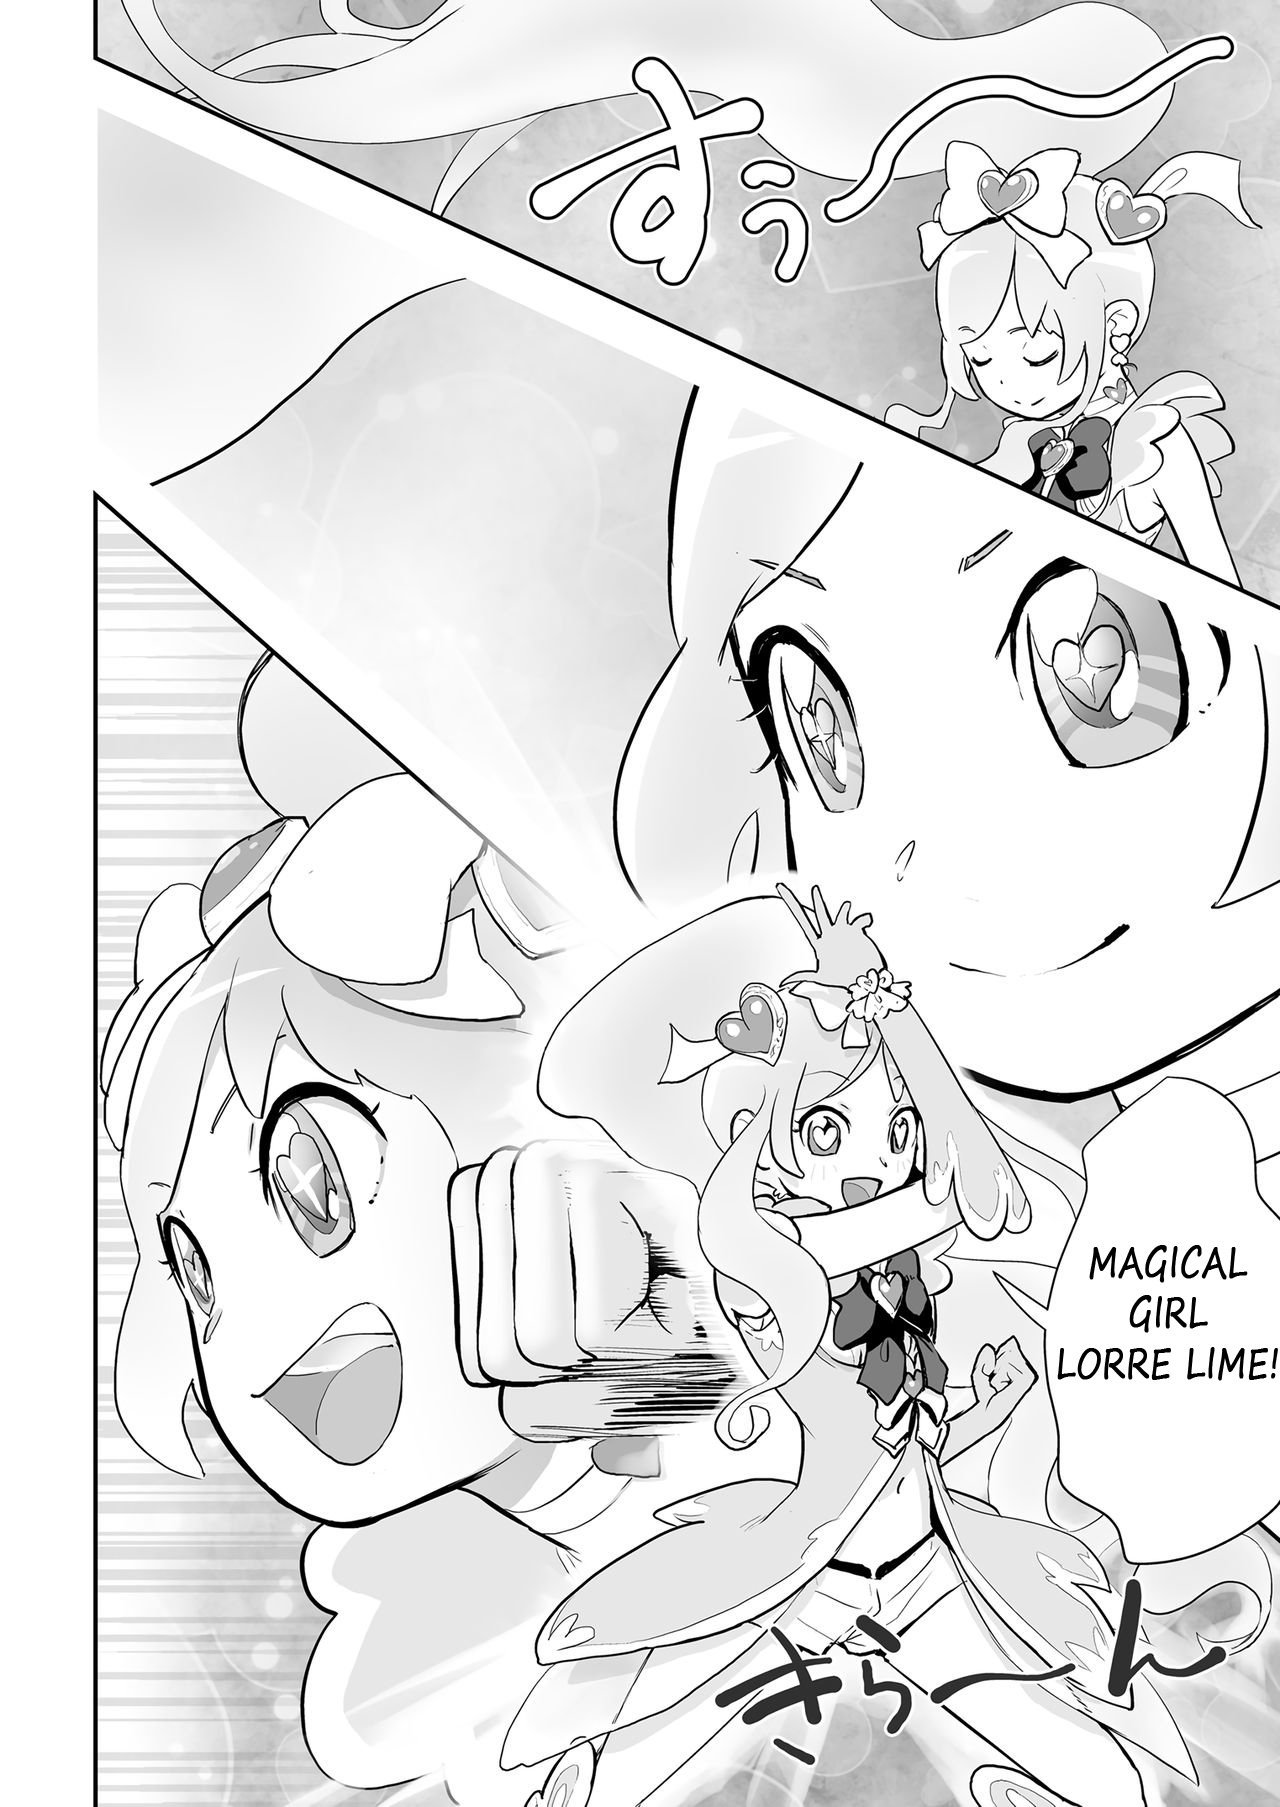 Magical Girl Lorre Lime - 21